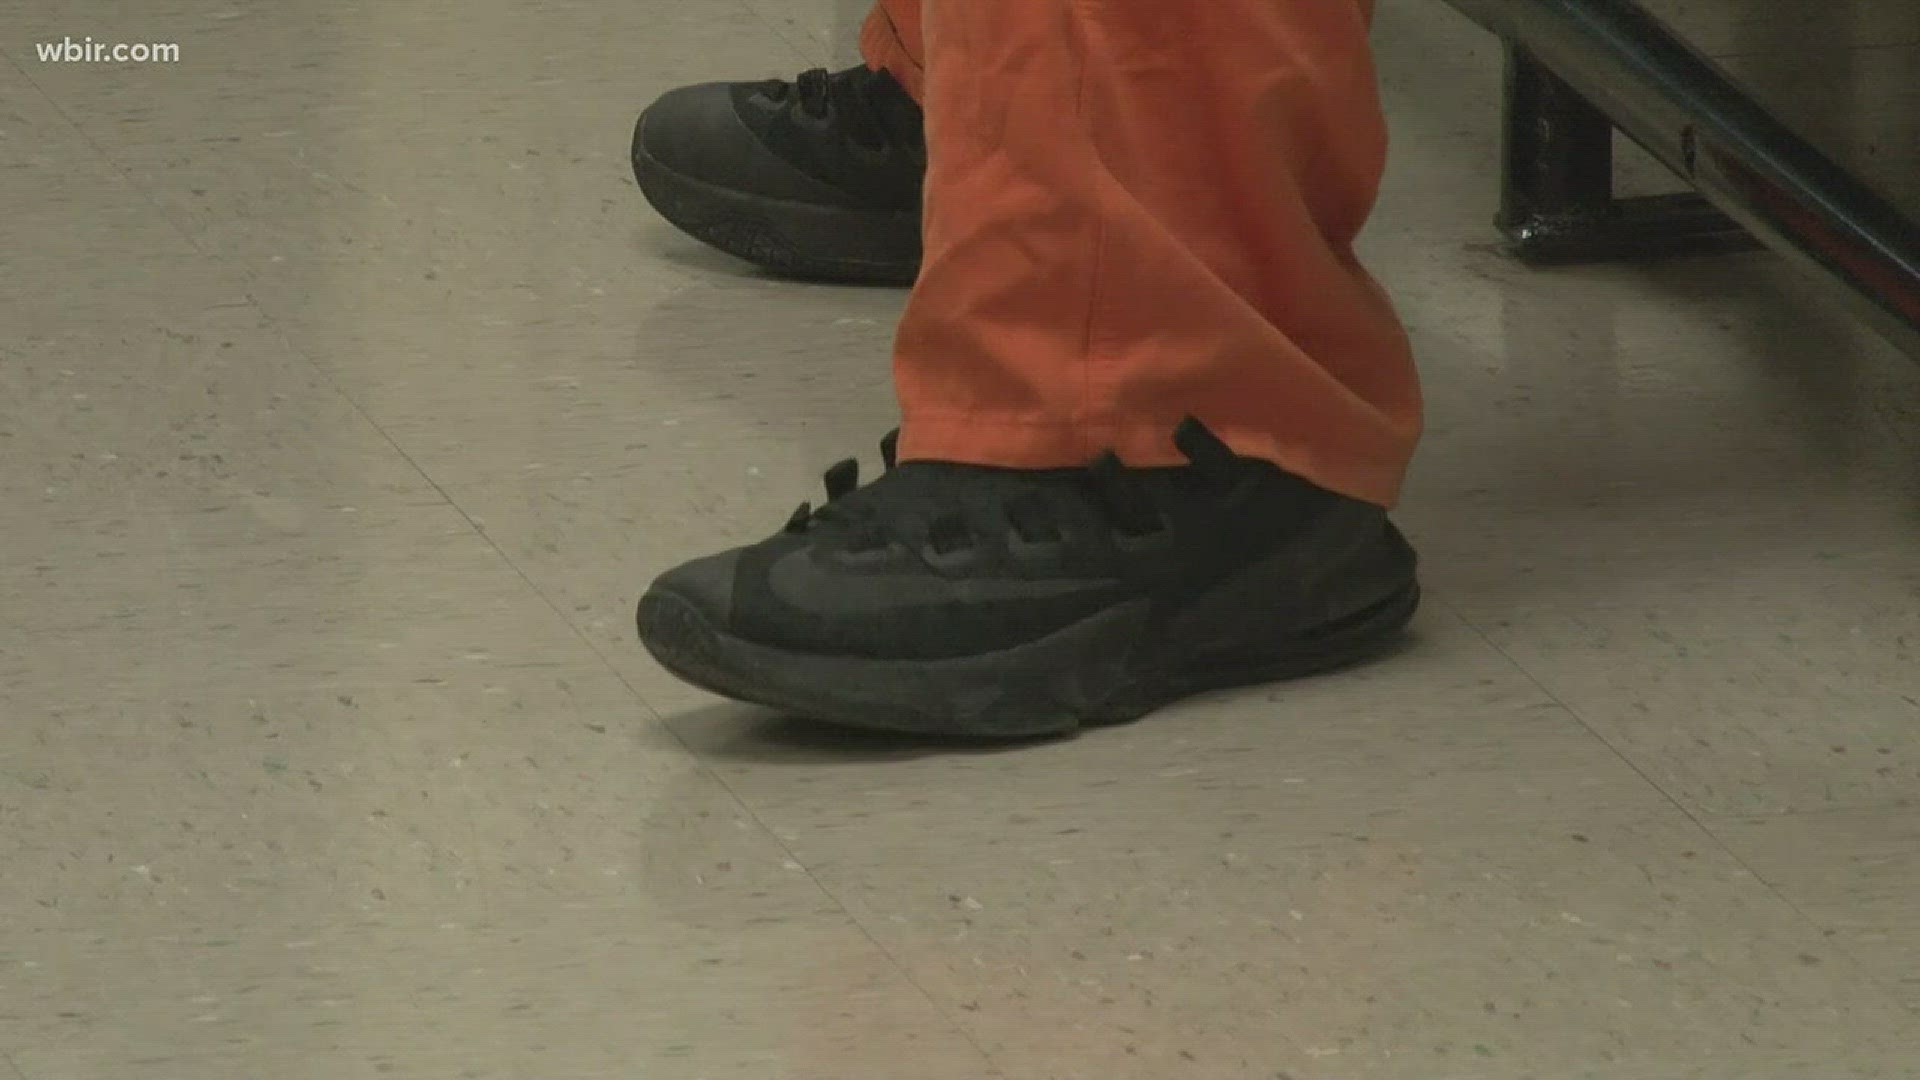 The BHUCC will open next week as an alternative for some jail inmates. Non-violent offenders with drug addictions may be sentenced here instead of the county jail.